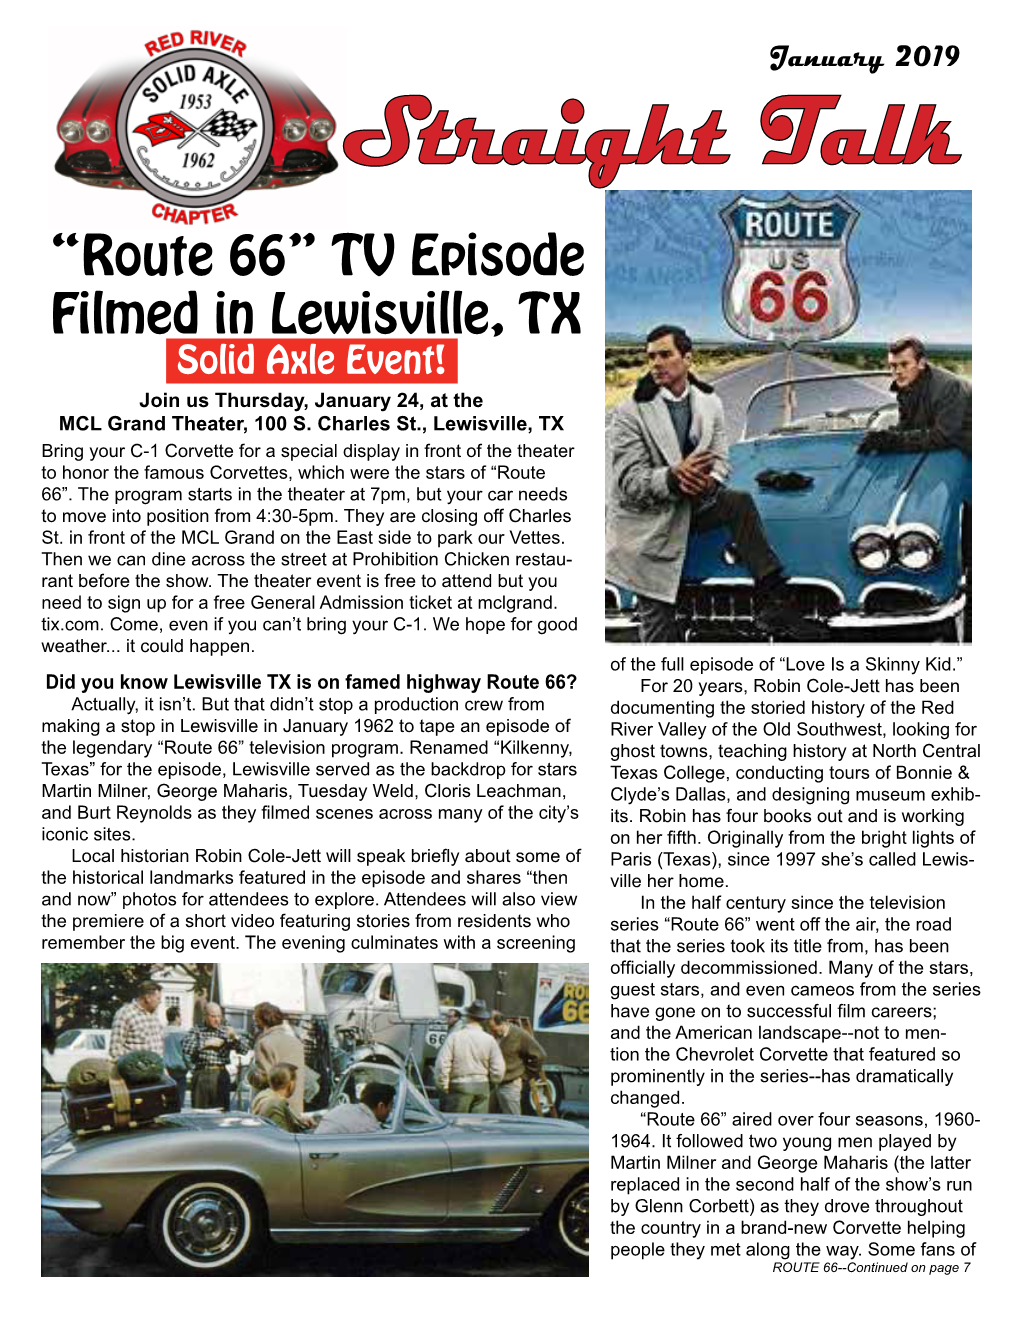 “Route 66” TV Episode Filmed in Lewisville, TX Solid Axle Event! Join Us Thursday, January 24, at the MCL Grand Theater, 100 S